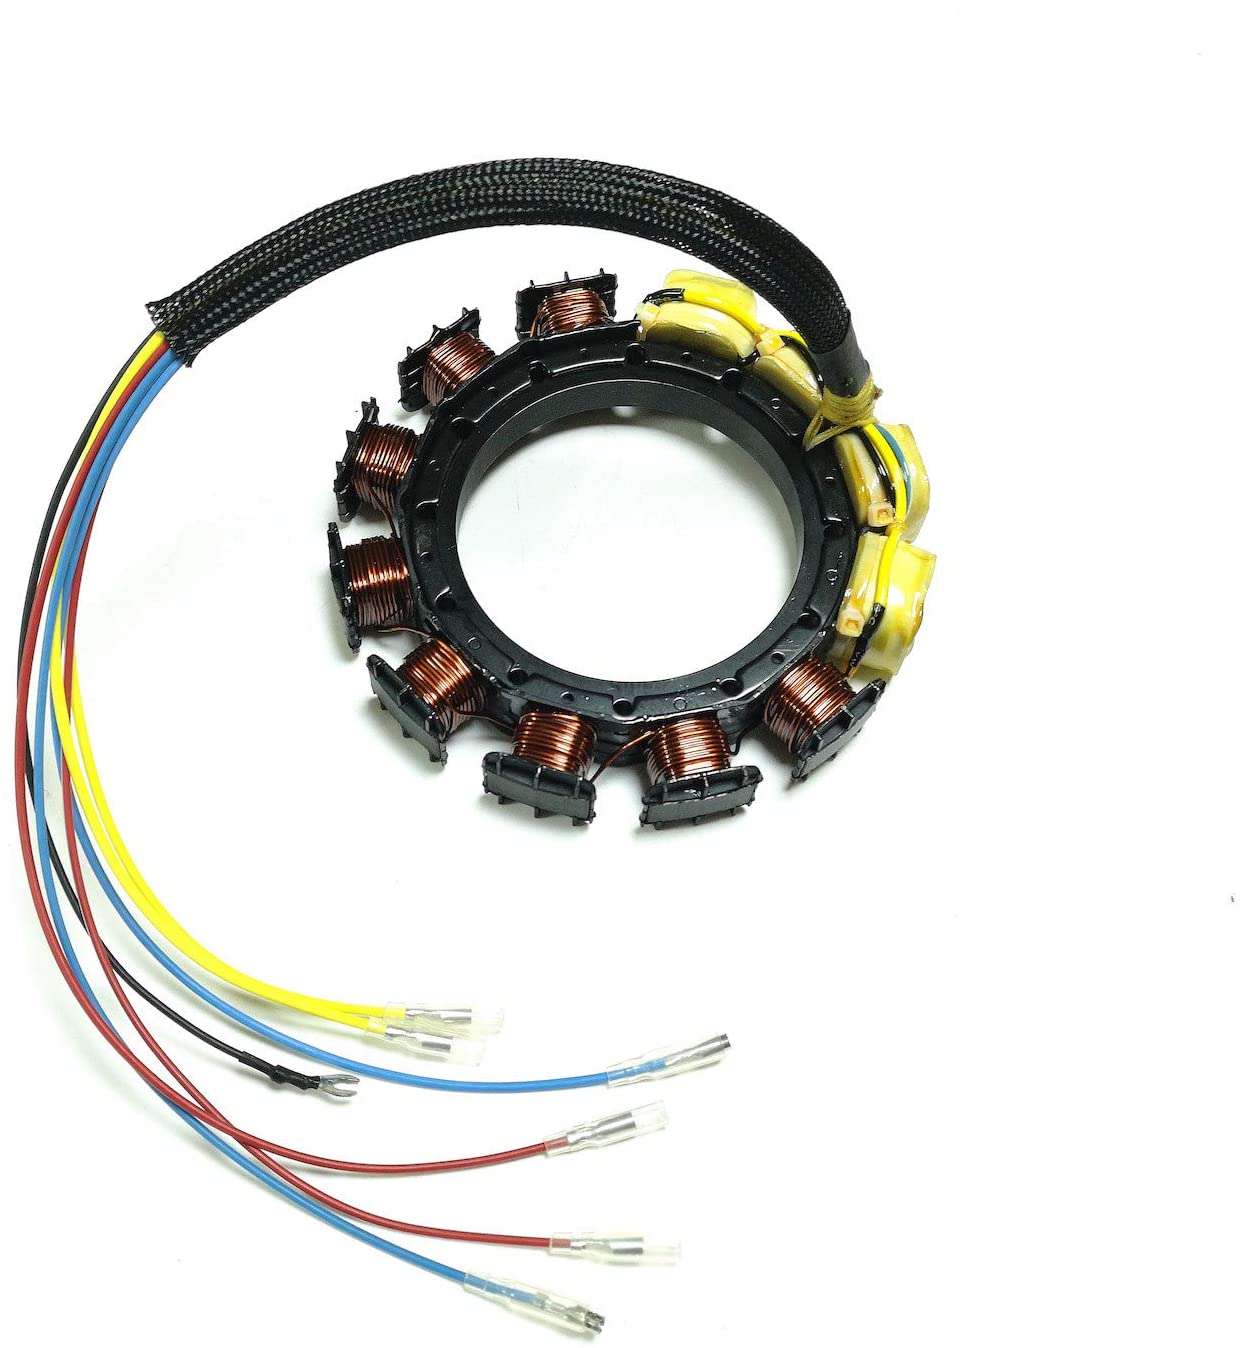 JETUNIT Outboard Stator For Mercury 210HP 175HP SportJet 16AMP 6 Cyl398-9873A36 398-9873A39 398-9873A1 398-9873A3 398-9873A4 174-9873-16